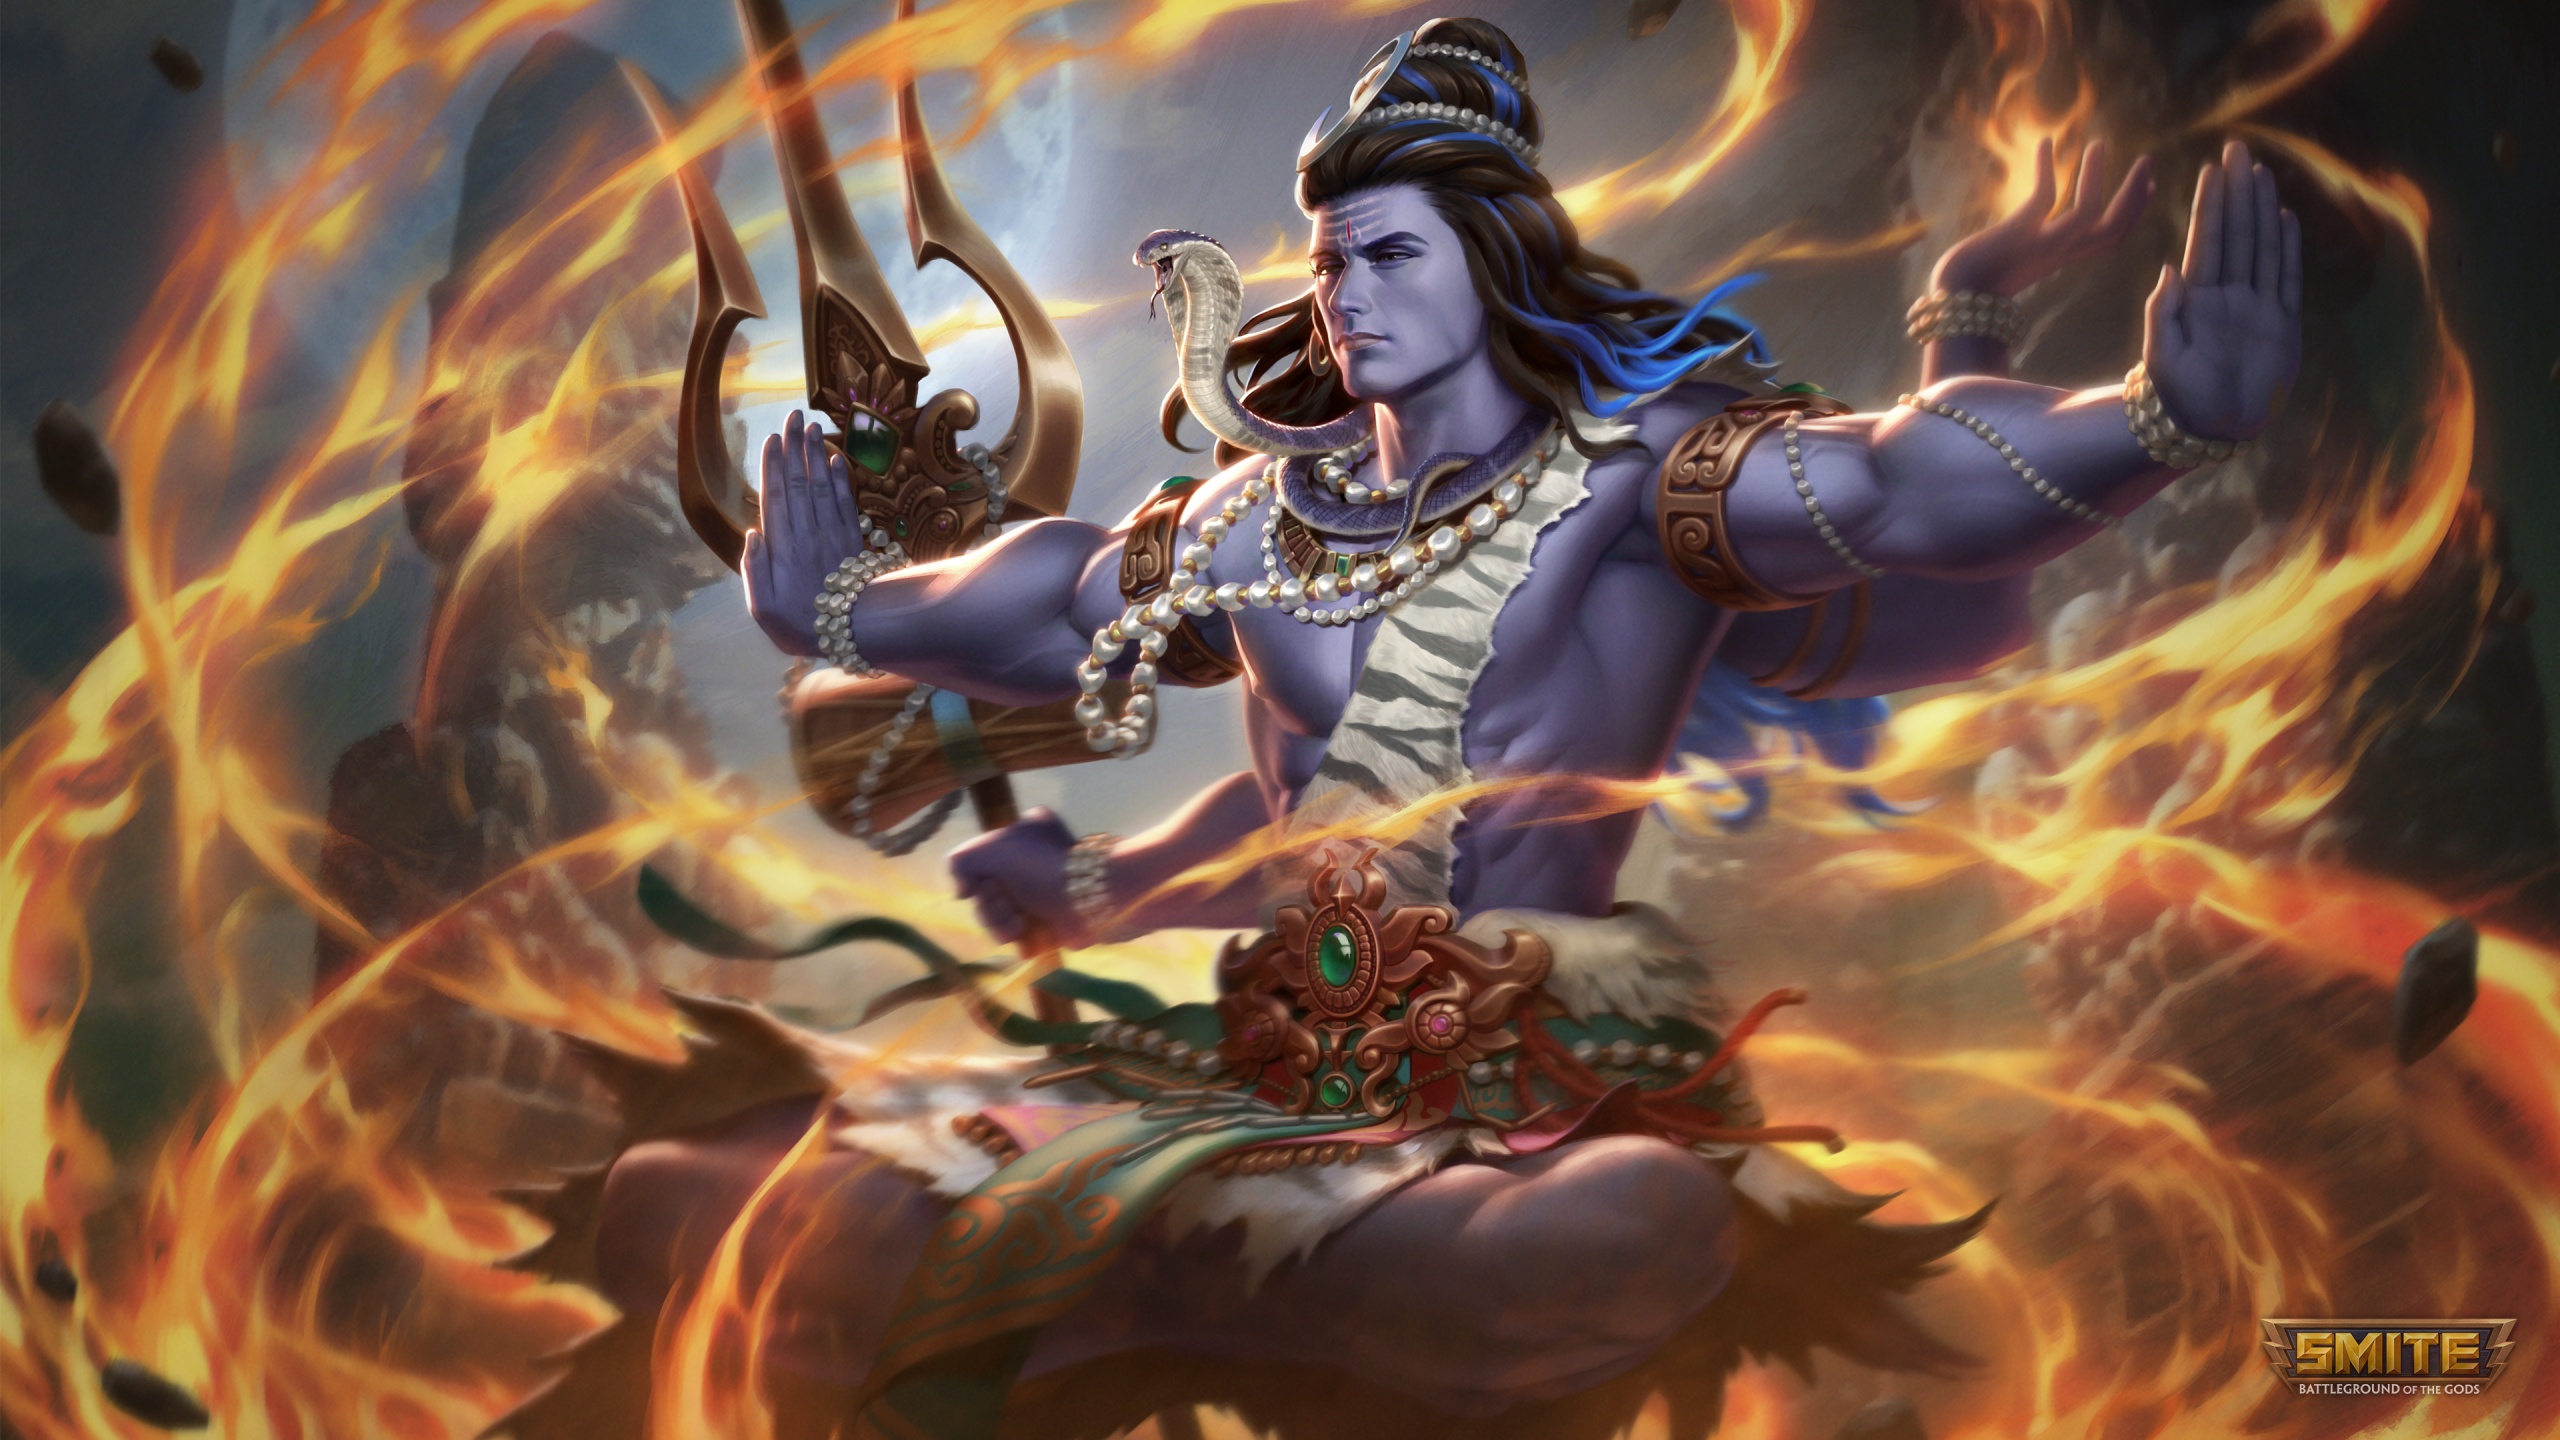 Fall in Love with the Powerful Lord Shiv Ji in These Stunning HD Wallpapers